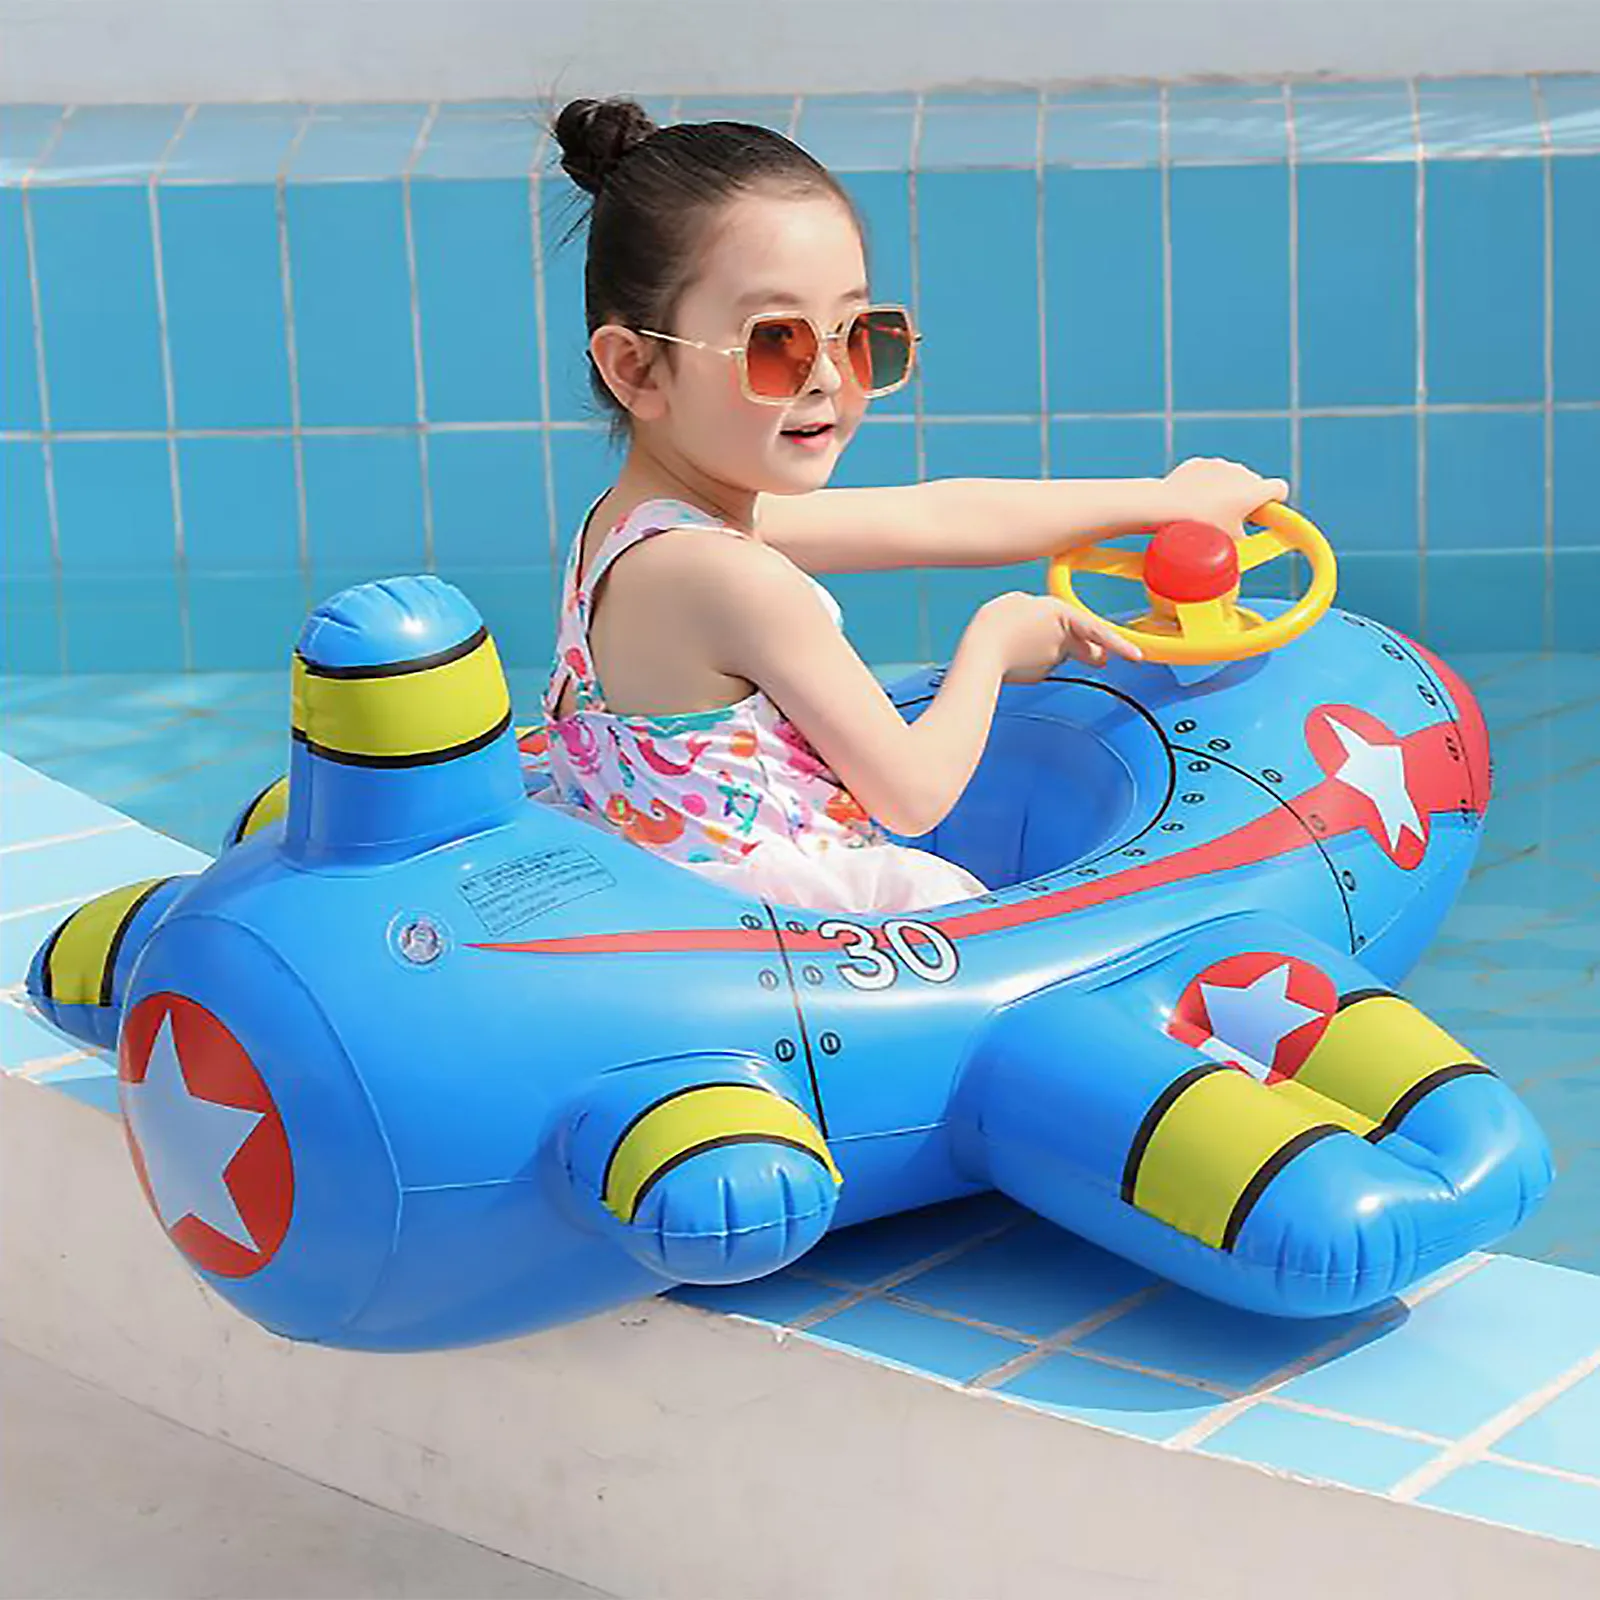 

Inflatable Floats Baby Swimming Airplane Seat New For Children High Quality Summer Pool Water Toy